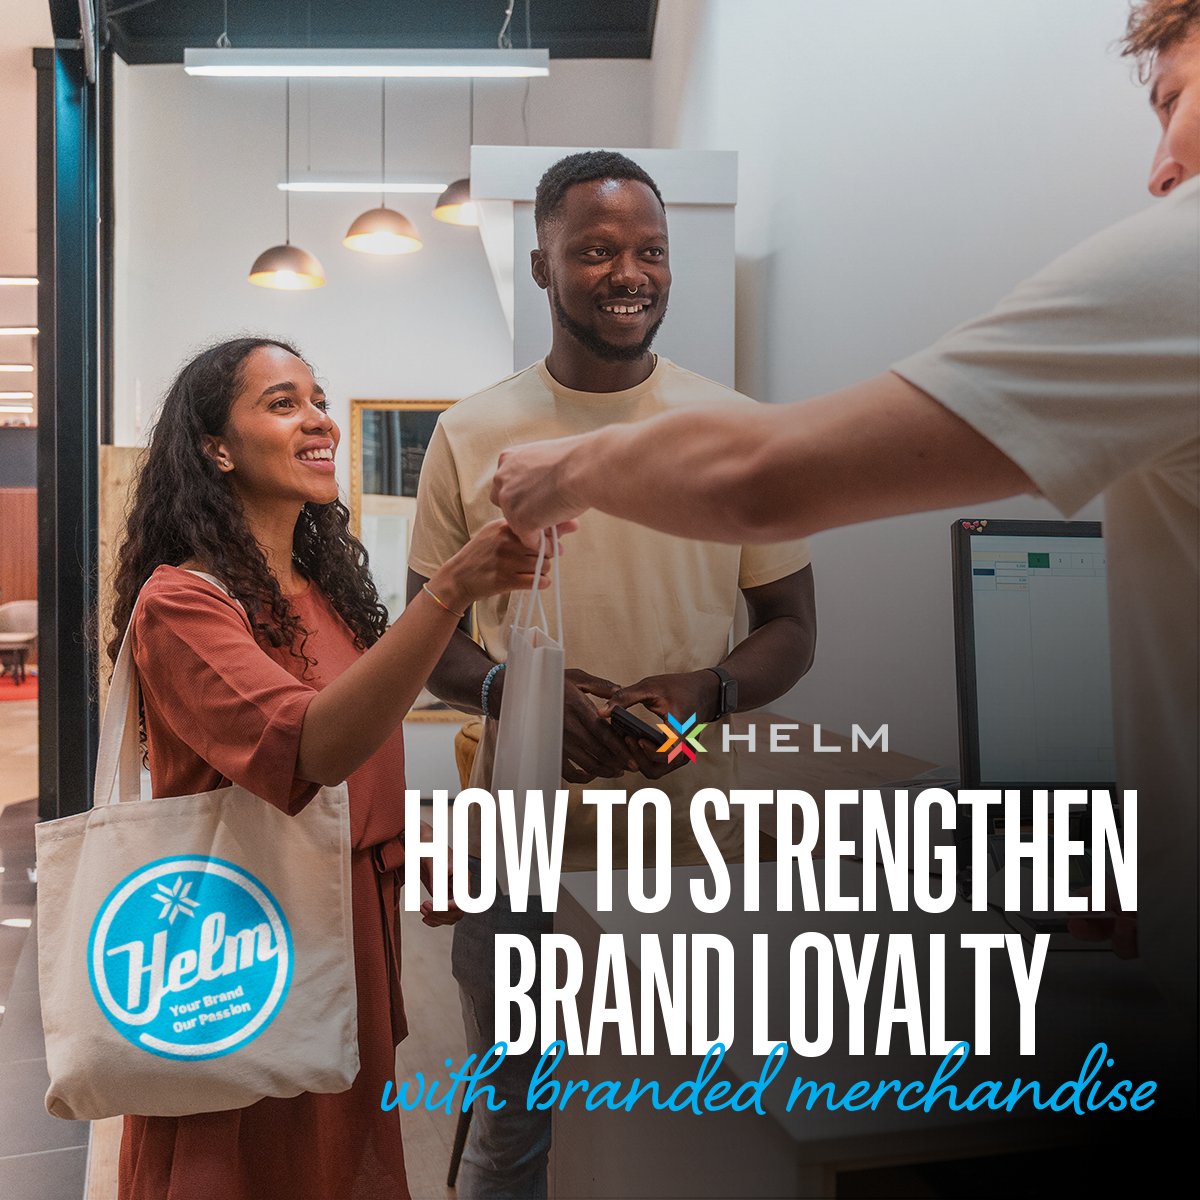 Check out the latest #Helm blog post to learn how strategically offering #brandedmerchandise through “#giftswithpurchase”, #giveaways, and in-store displays, has the power to build customer and #brandloyalty for sustained business growth.
Read now: helm.com/blog-posts/how….